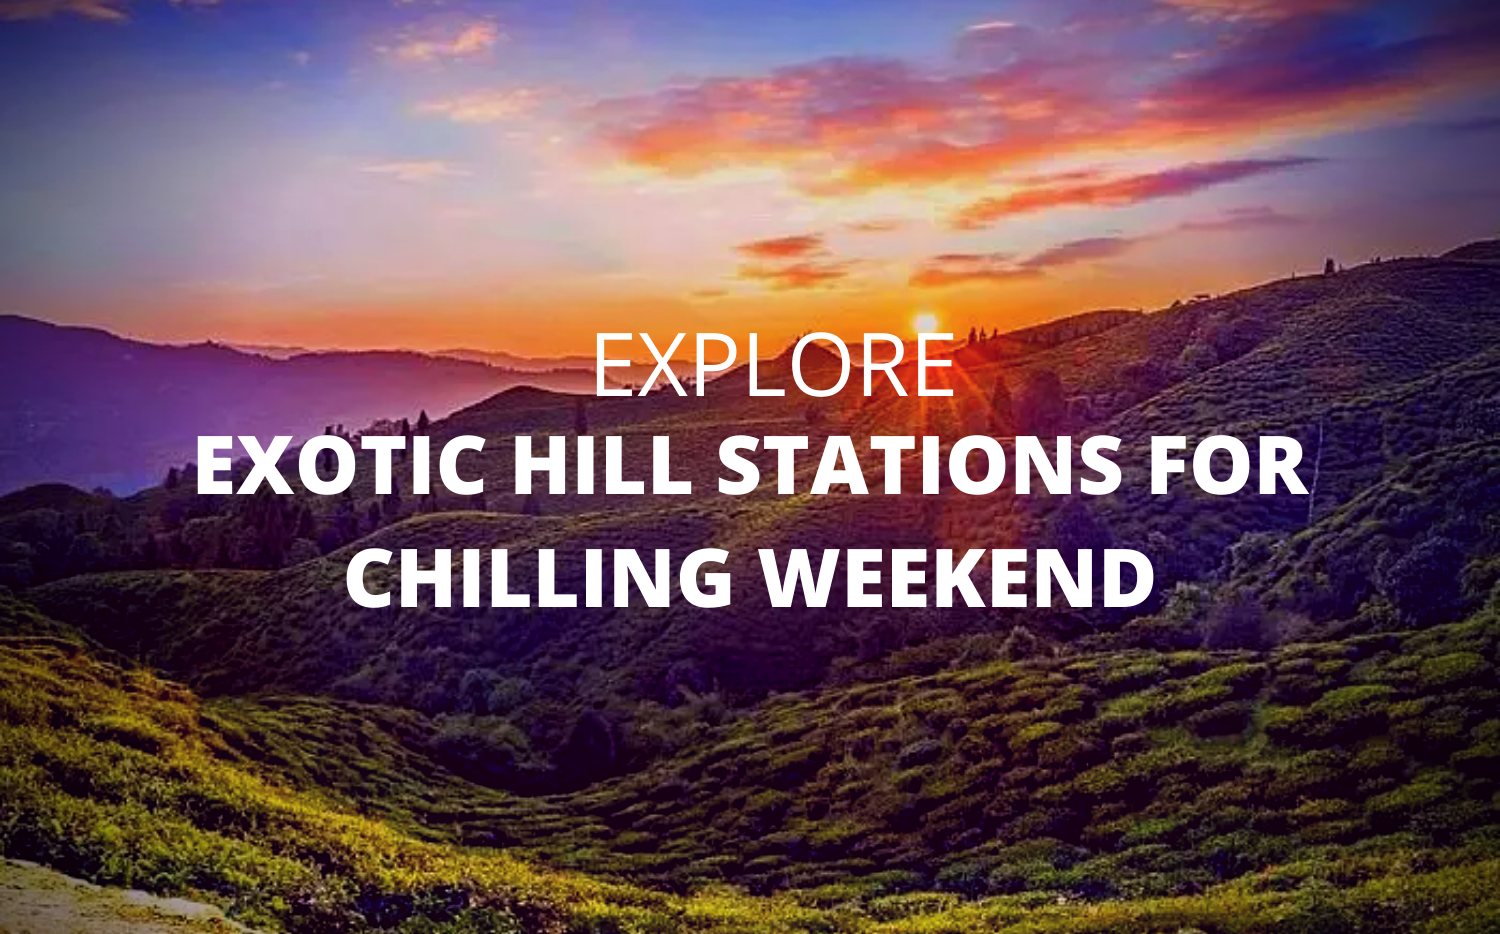 Beat The Heat With Exotic Hill Stations For A Chilling Weekend